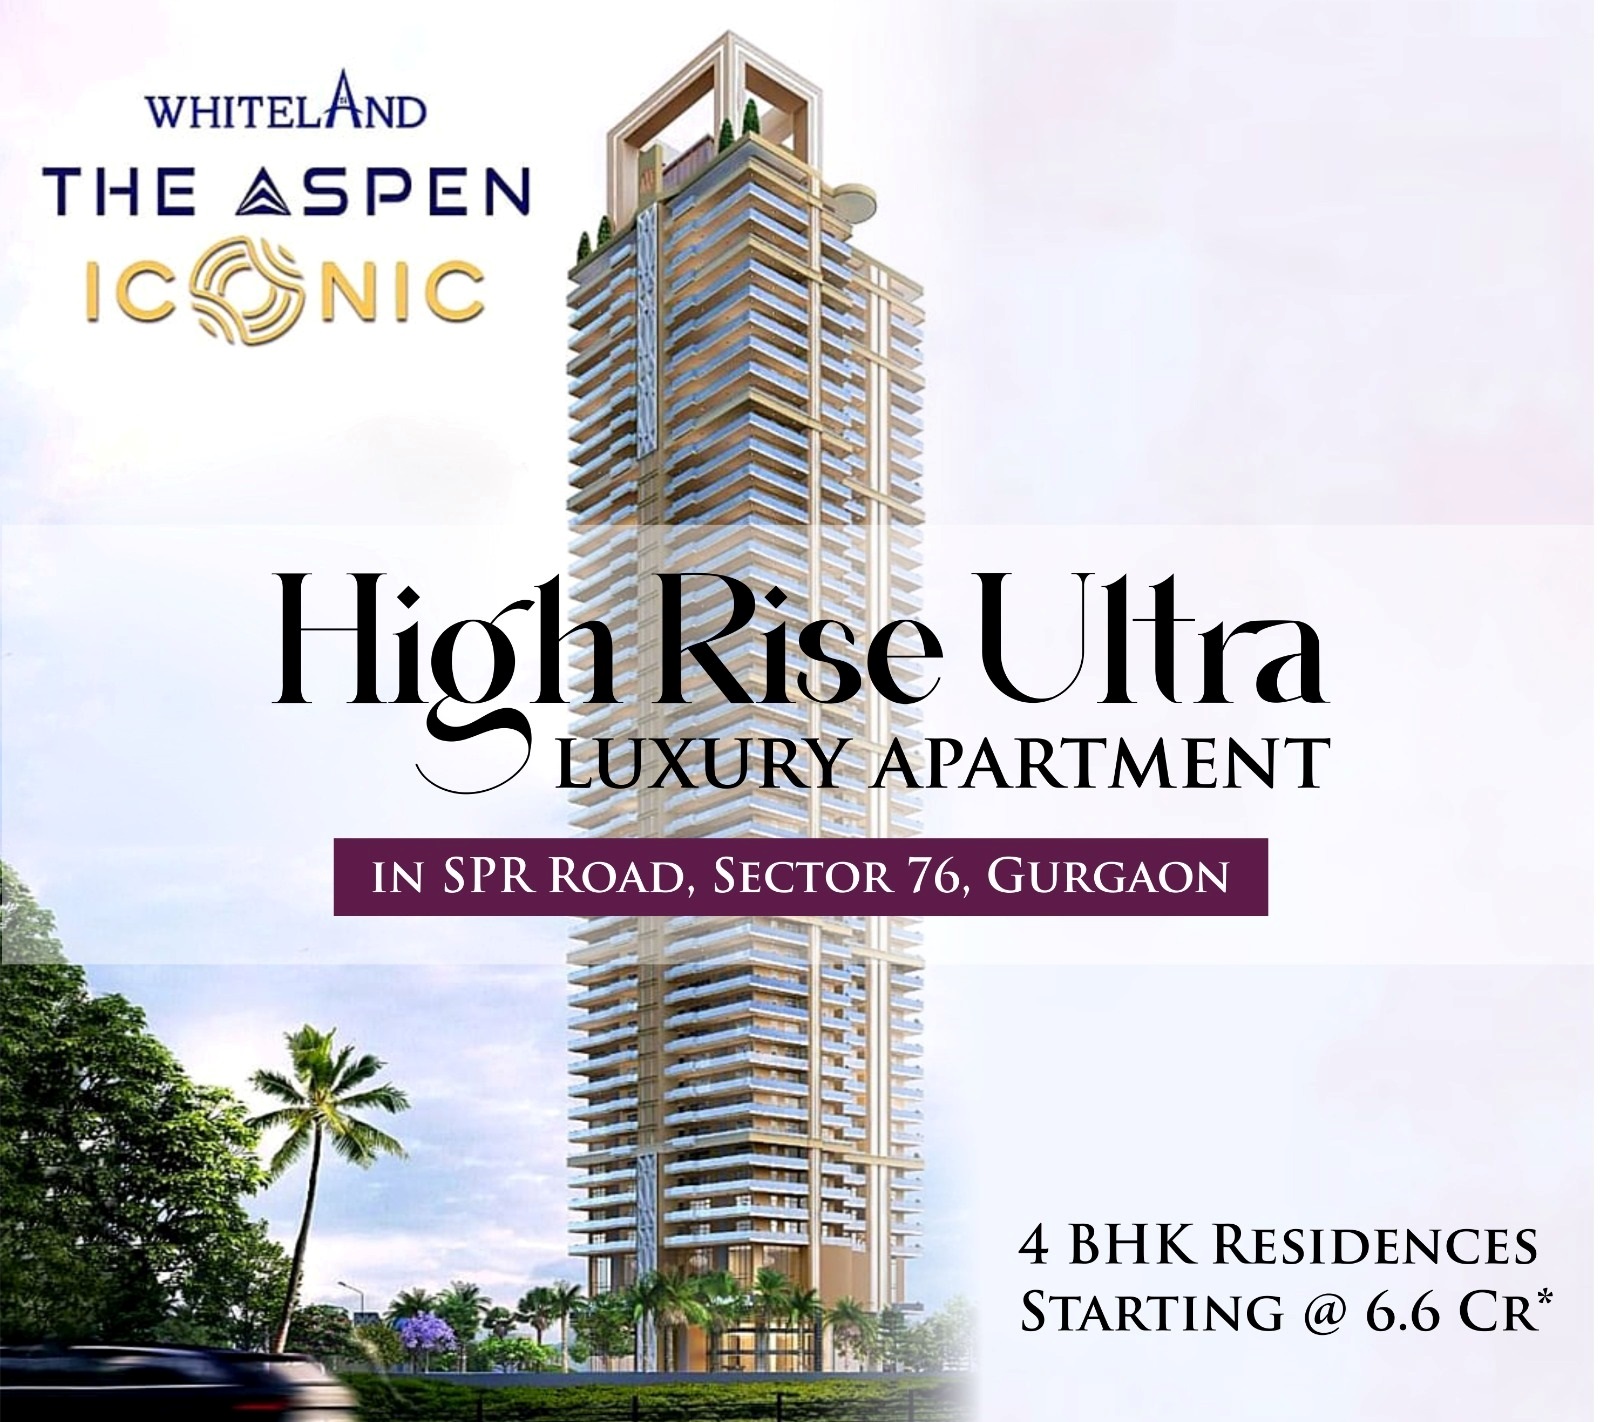 Book 4 BHK Residences starting Rs 6.6 Cr at Whiteland The Aspen in Sector 76, Gurgaon